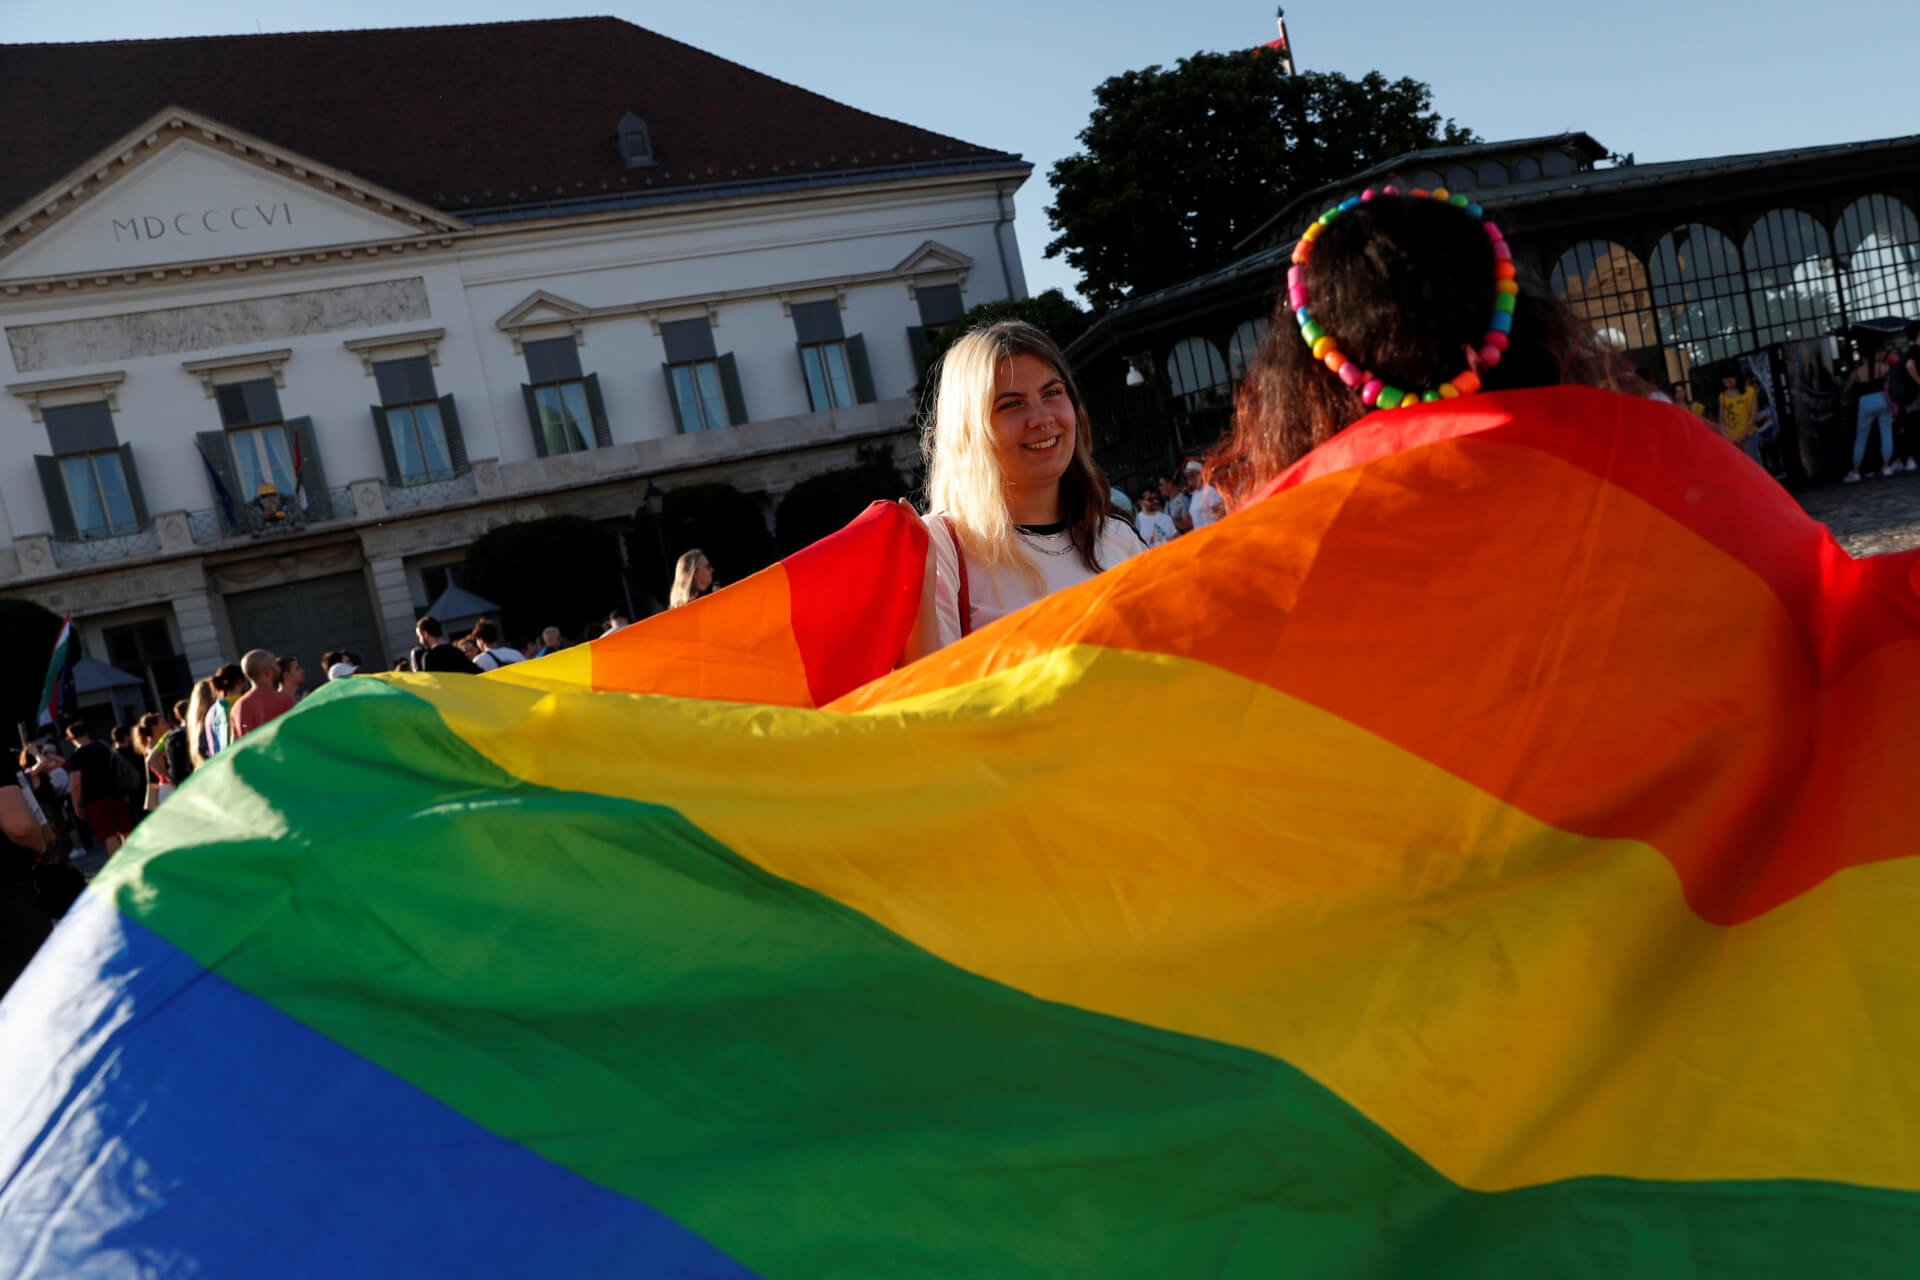 EU, Hungary Rift Deepens As Hungary Refuses to Repeal Controversial Anti-LGBT Law